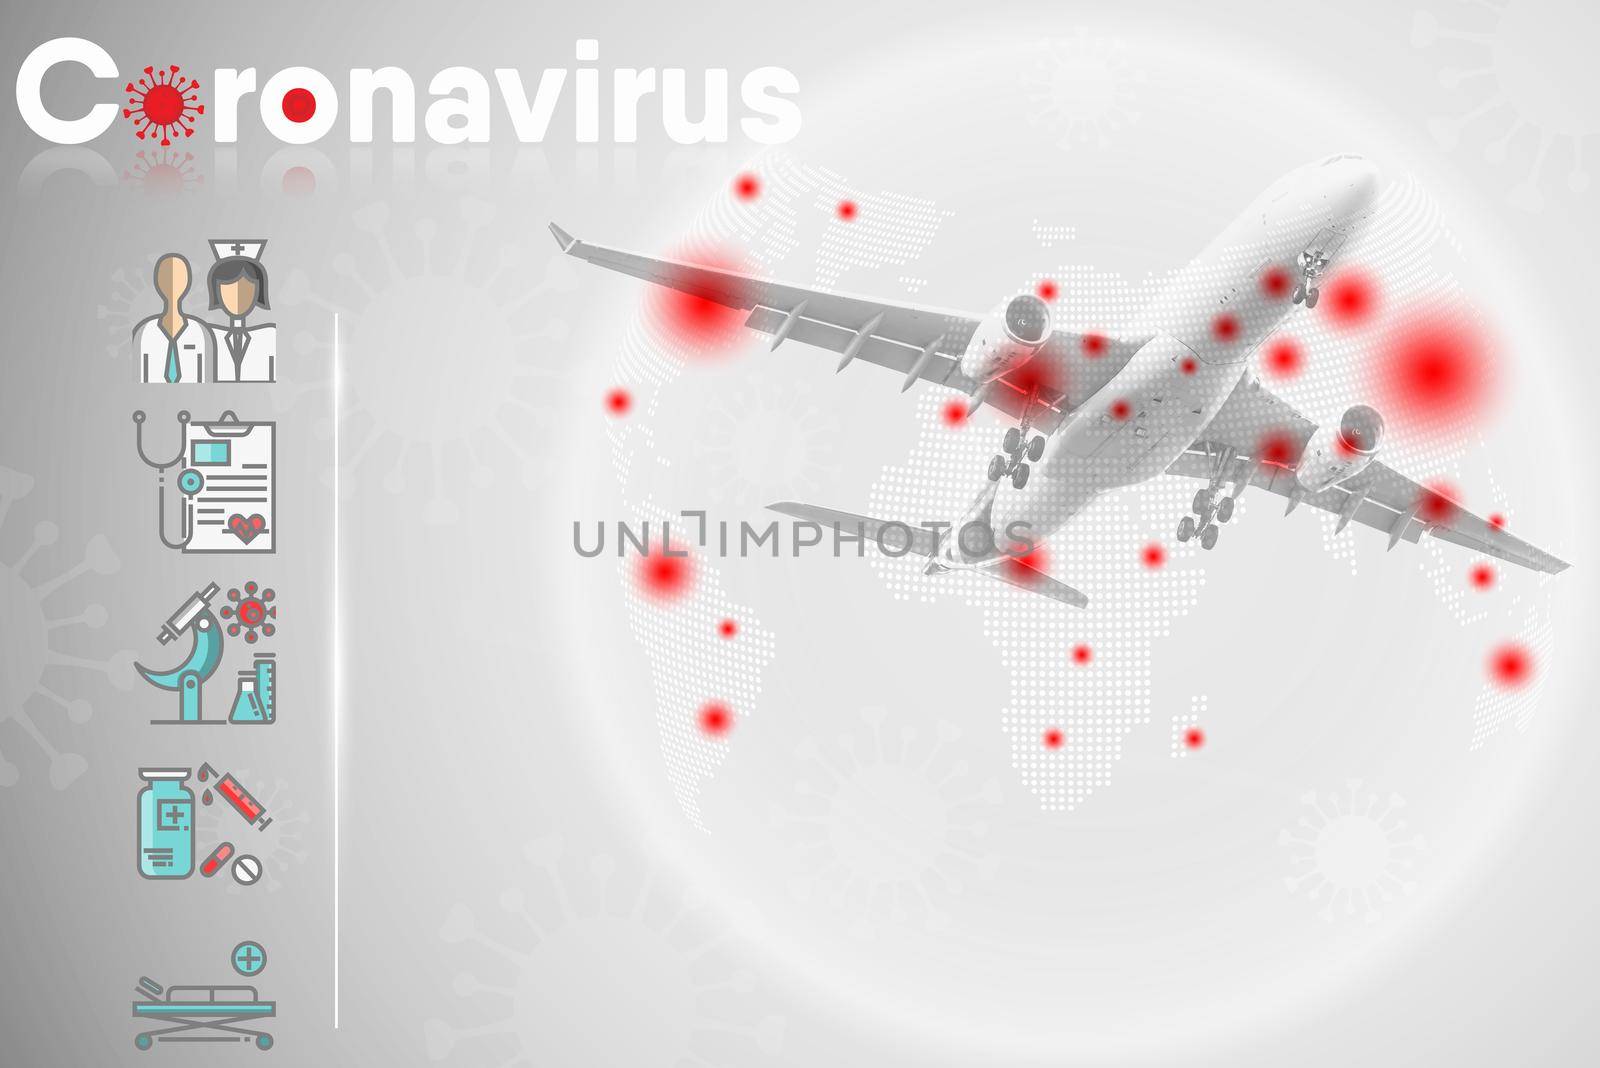 Coronavirus Crisis and Health Prevention From Covid-19 Virus of Public Airplane Aviation, Medical Covid Pandemic Guideline Template for Passenger of Transportation Airline. Healthcare/Medicine Concept by MahaHeang245789